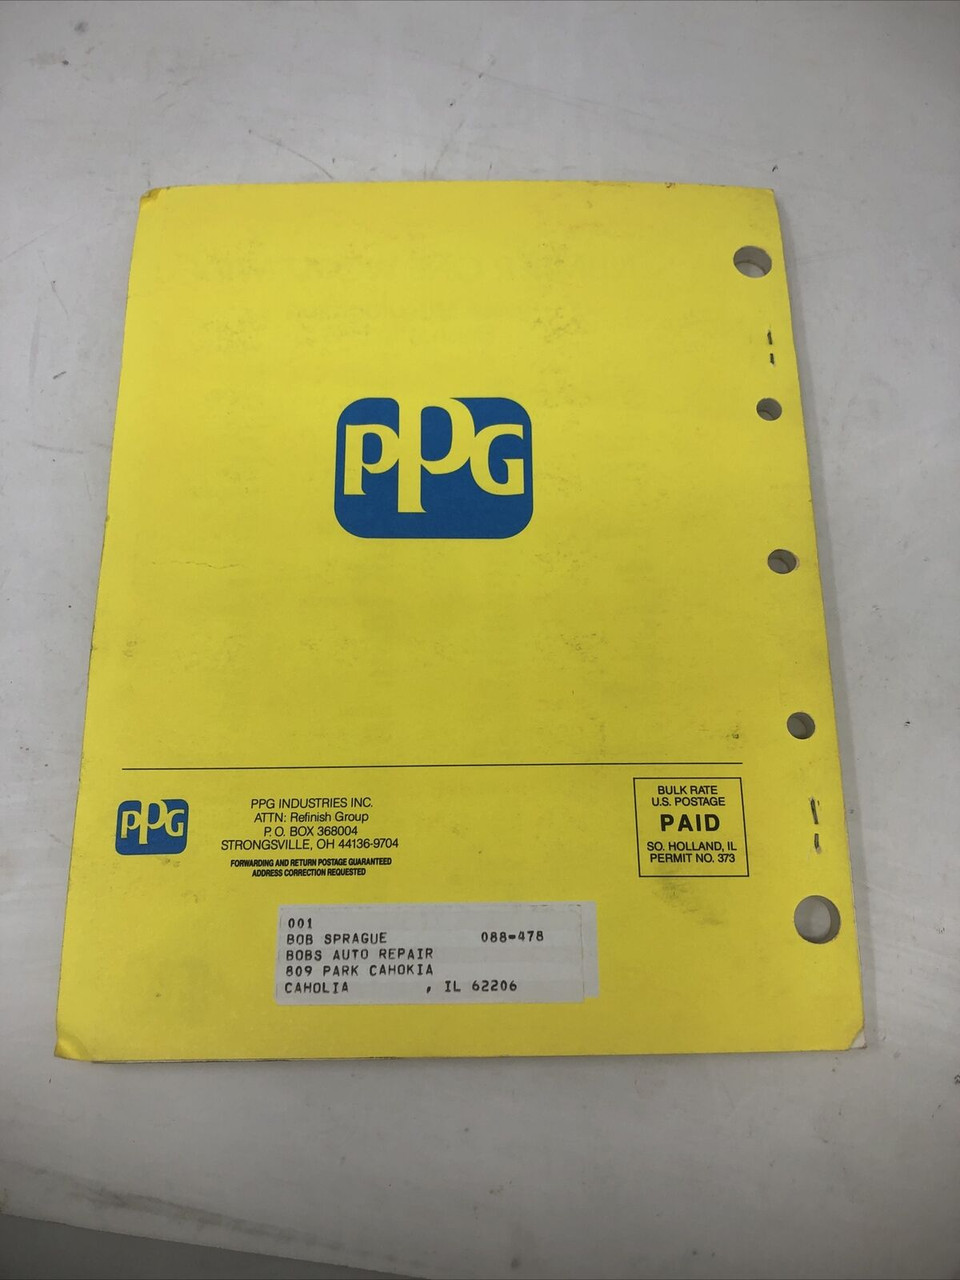 PPG 1991 IMPORT COLOR INFORMATION BOOKLET MANUAL  -PREOWNED